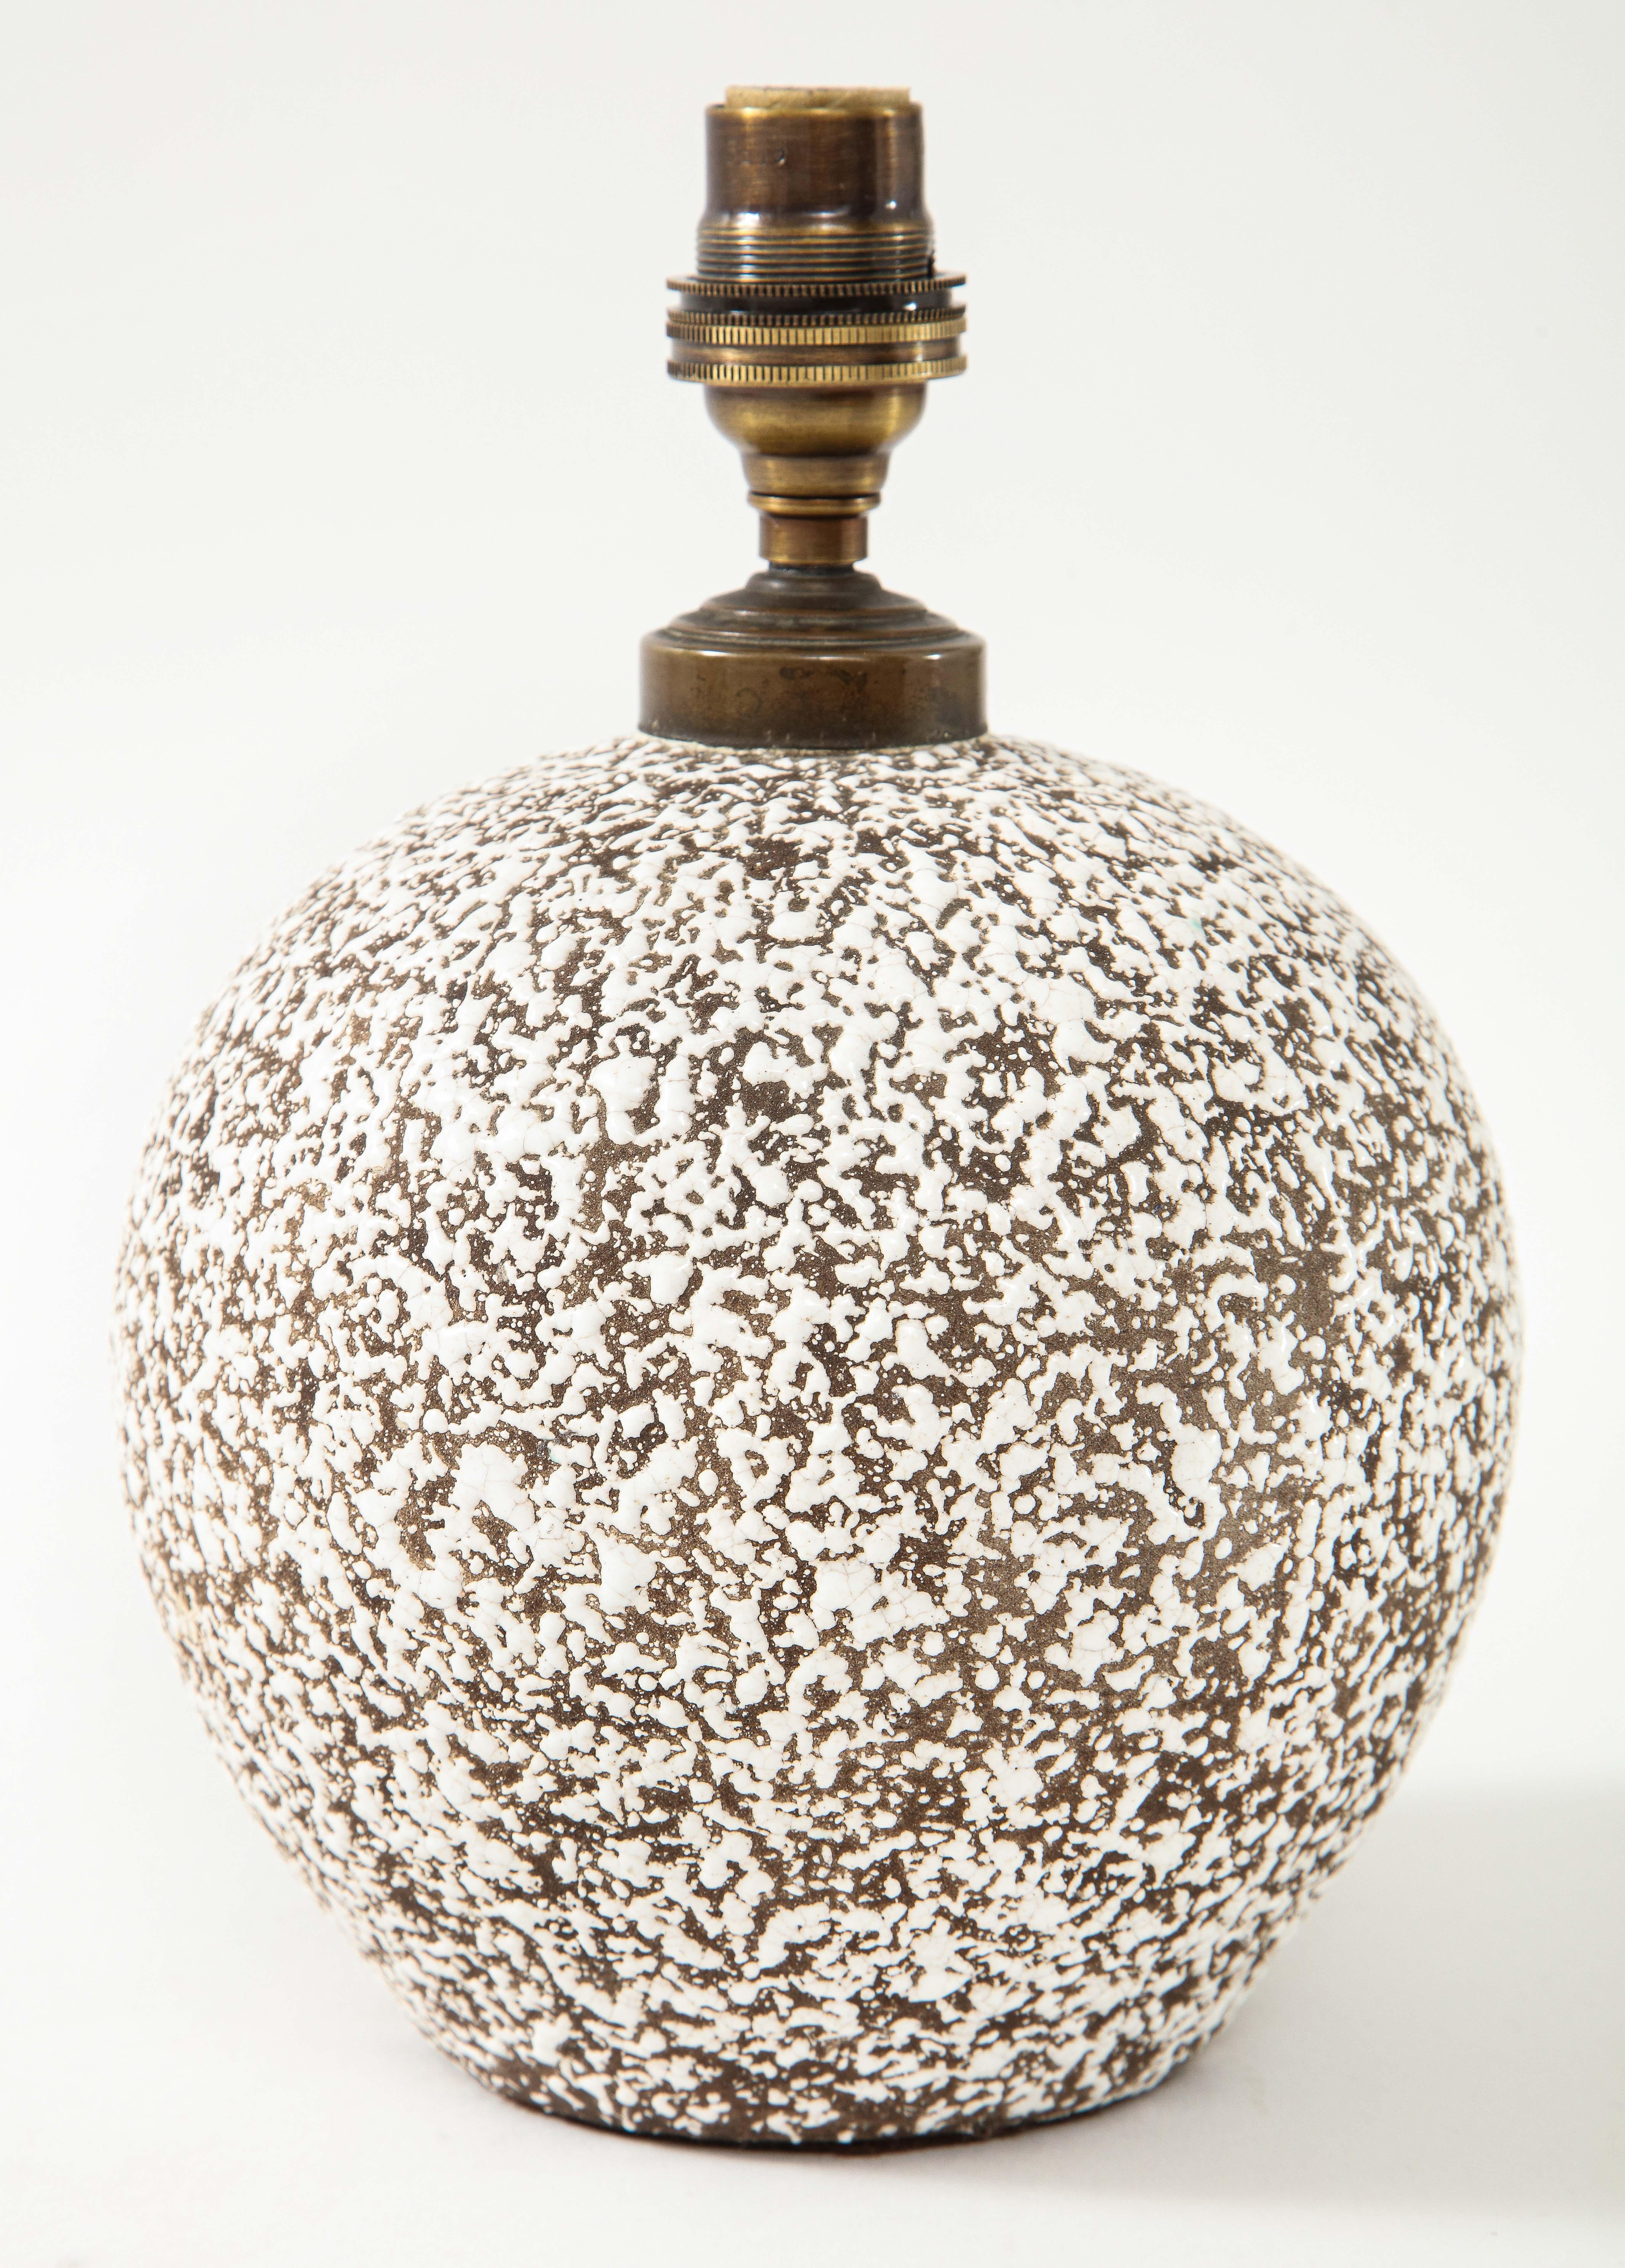 Mid-20th Century French Ceramic CAB Lamp with Custom Parchment Shade, c. 1930-40